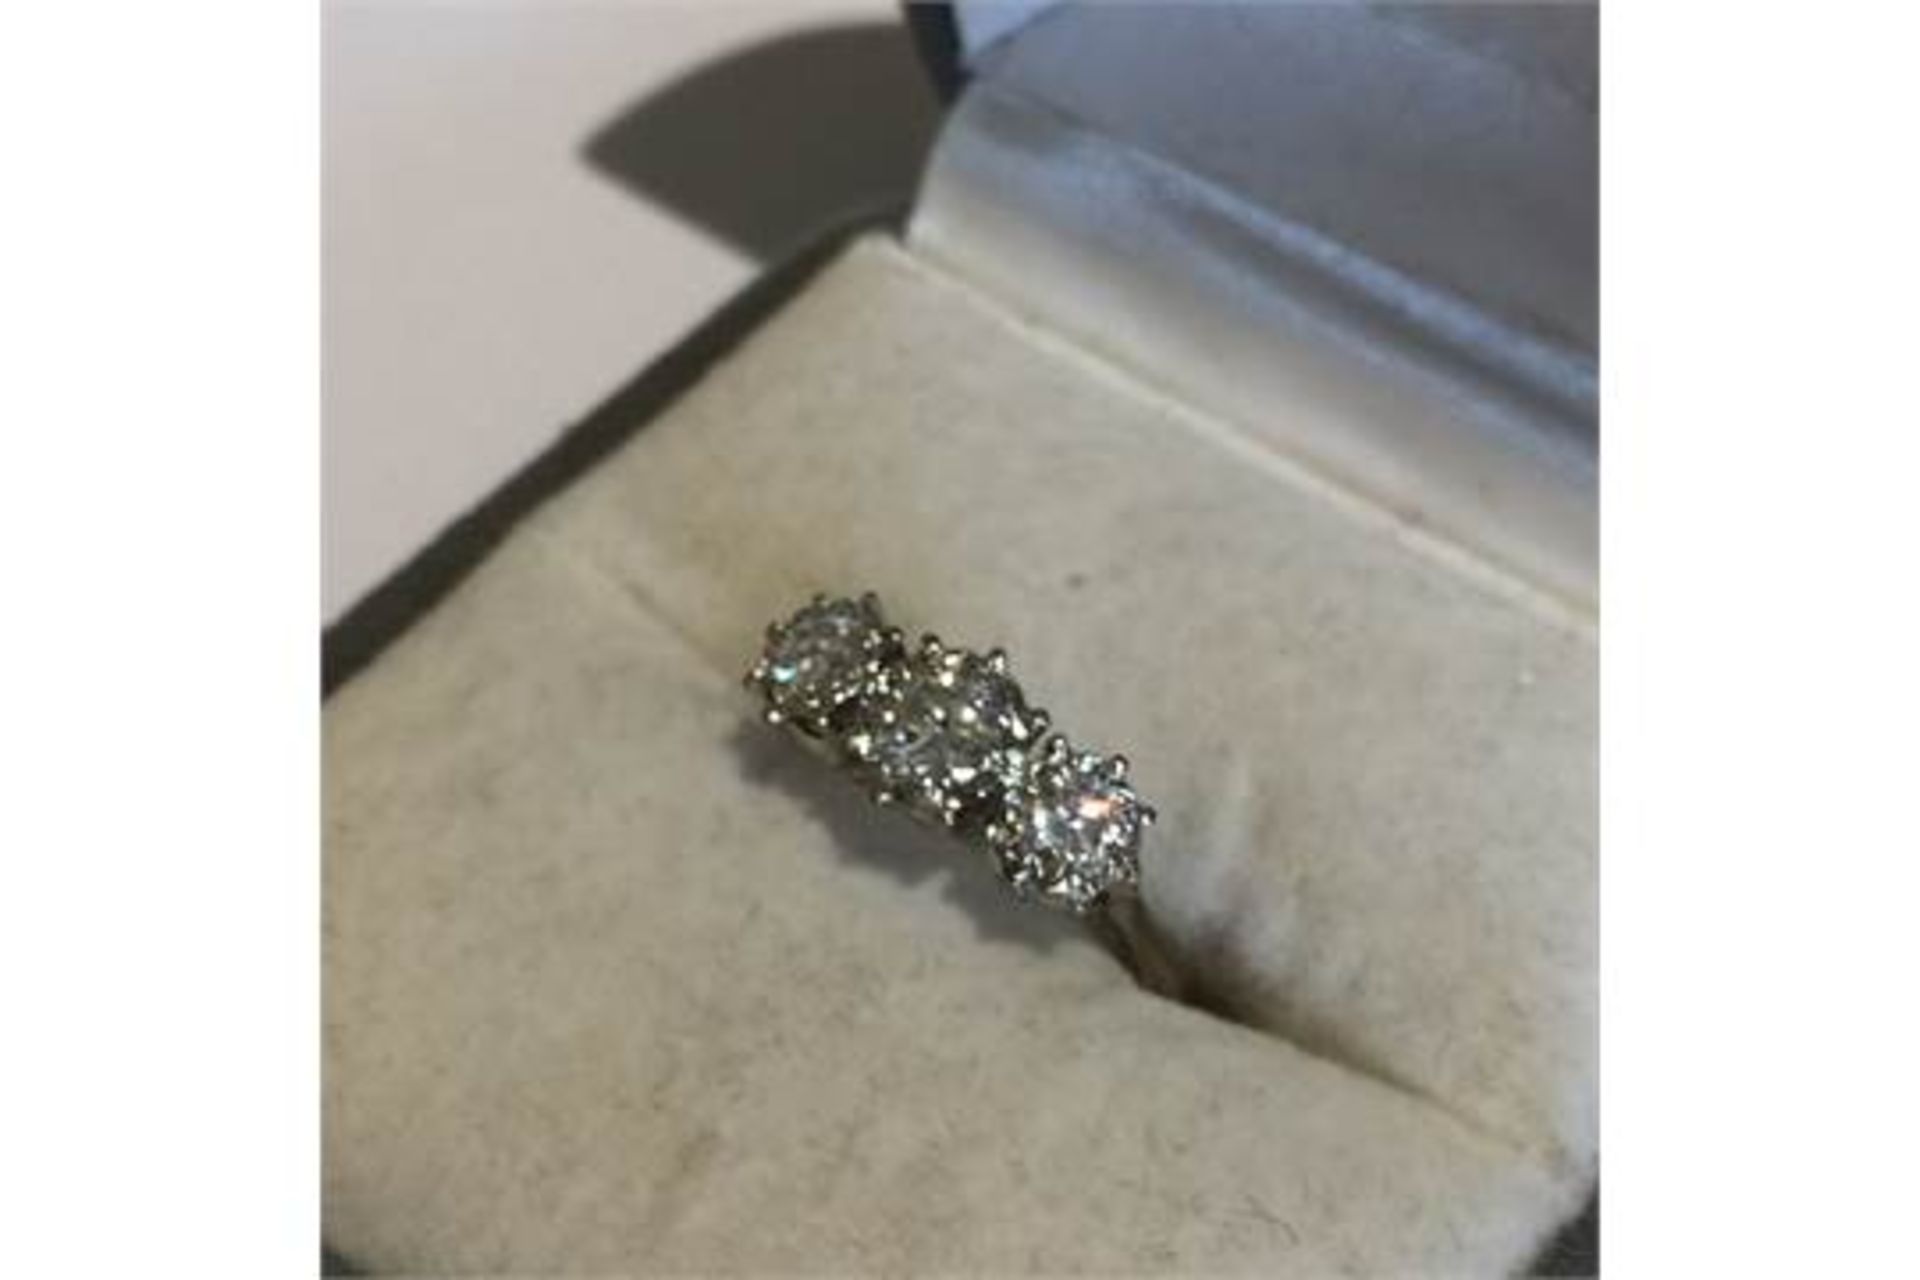 18ct White Gold 0.65 (approx) Diamond Trilogy Ring - Marked 18ct - Tested for 18ct